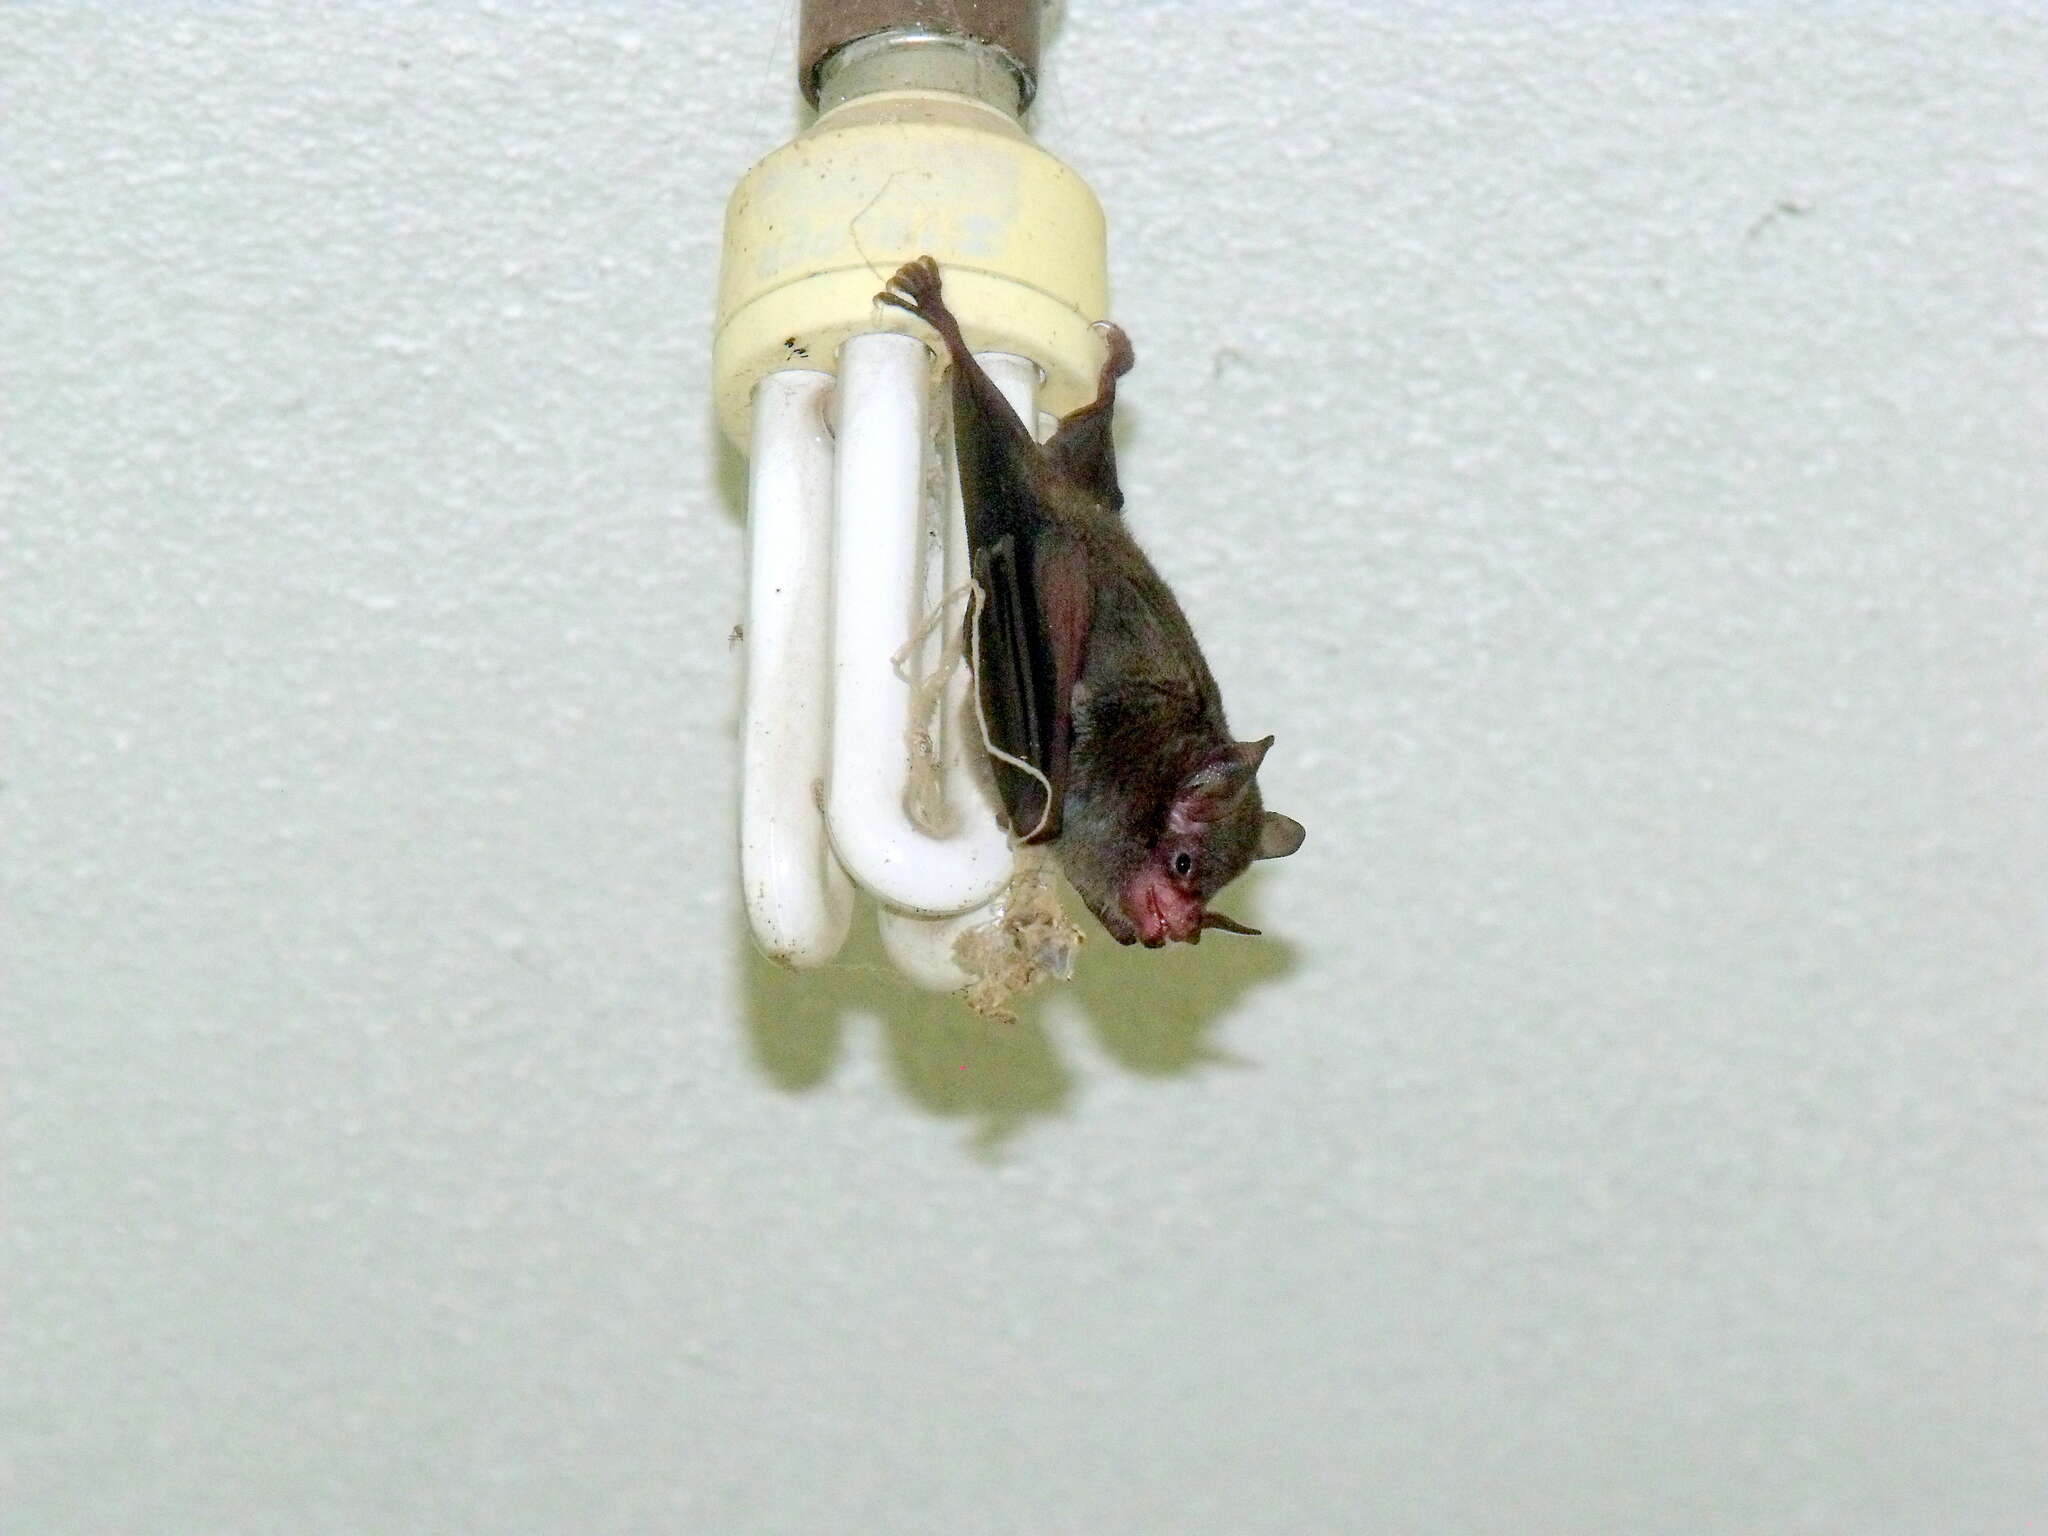 Image of Sowell’s Short-tailed Bat